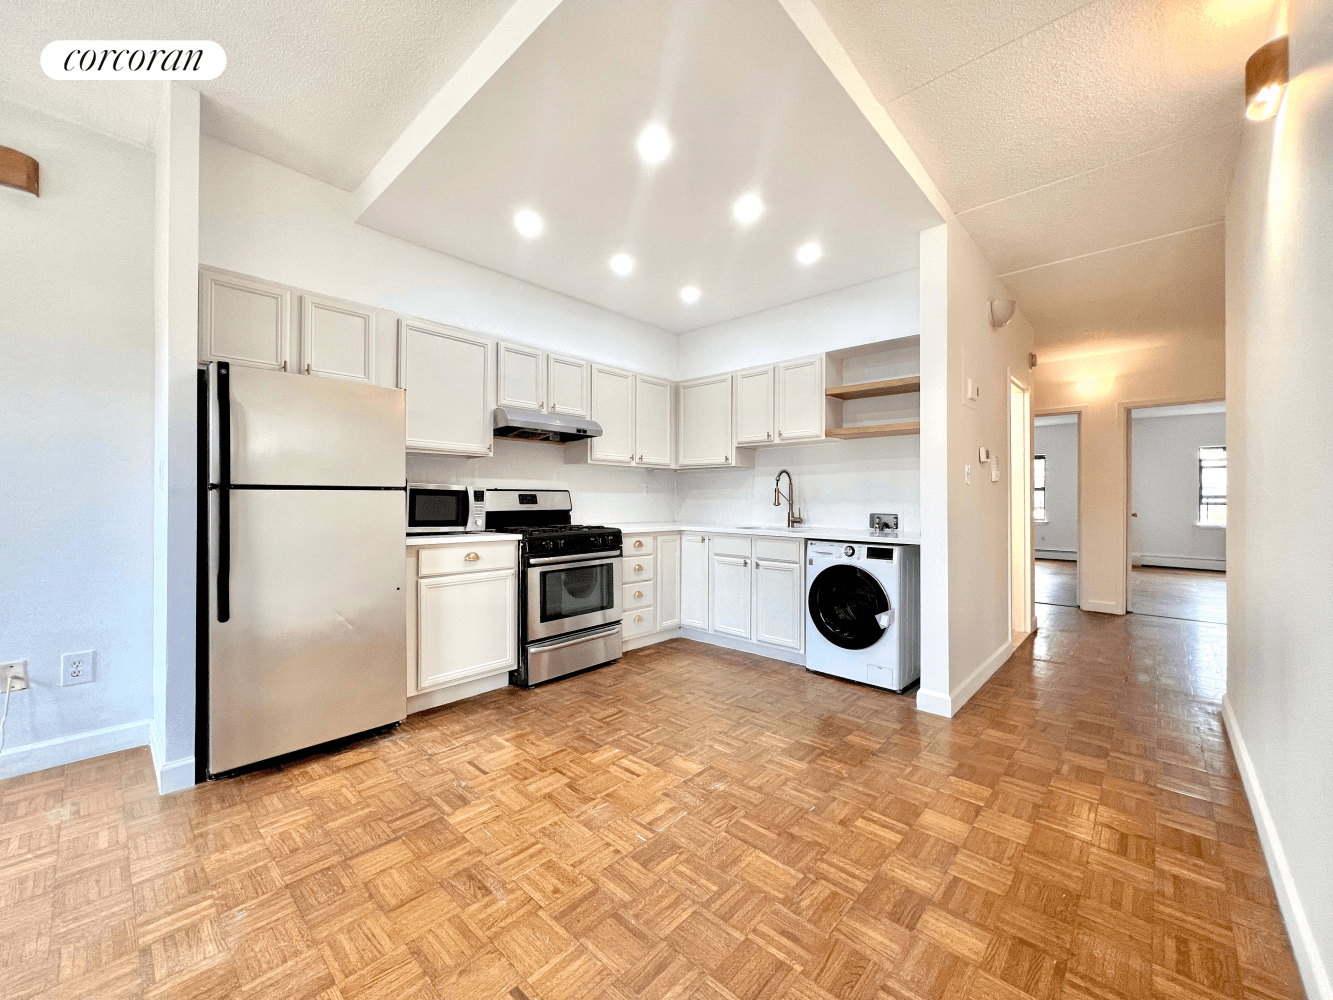 Welcome to this bright, recently renovated, and very spacious 2 Bedroom residence in a well maintained townhouse on a beautiful tree lined block.